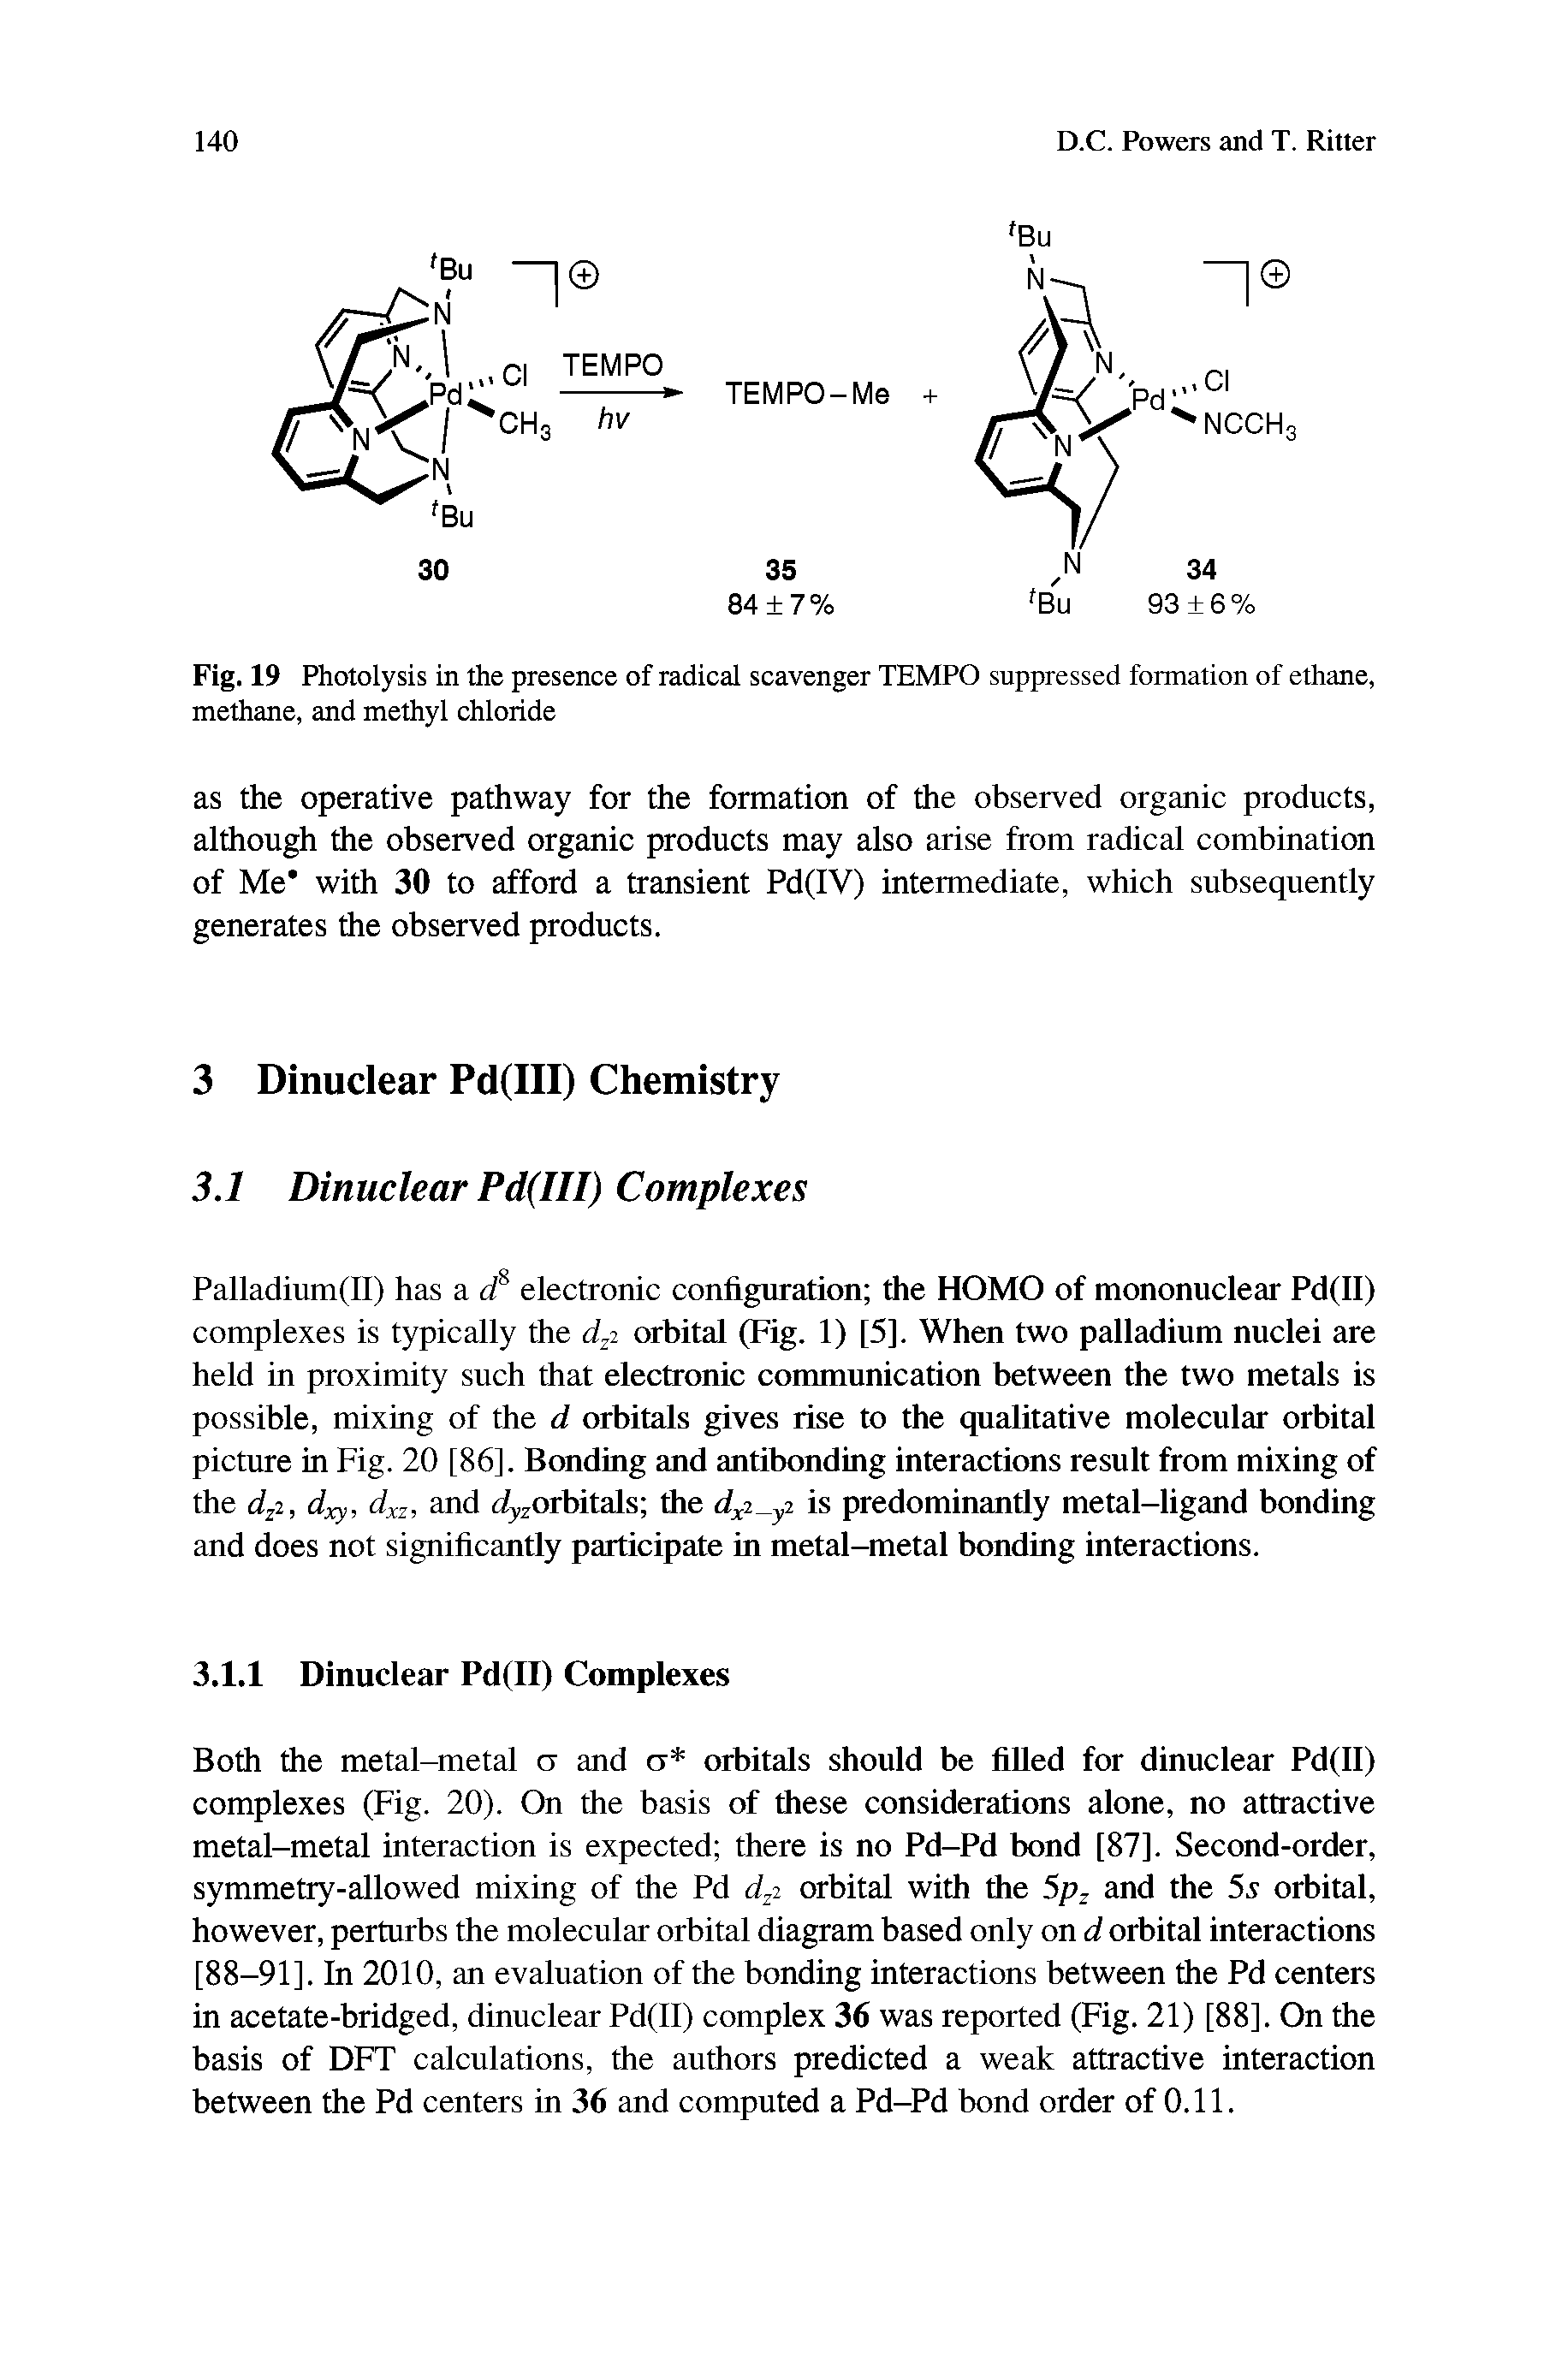 Fig. 19 Photolysis in the presence of radical scavenger TEMPO suppressed formation of ethane, methane, and methyl chloride...